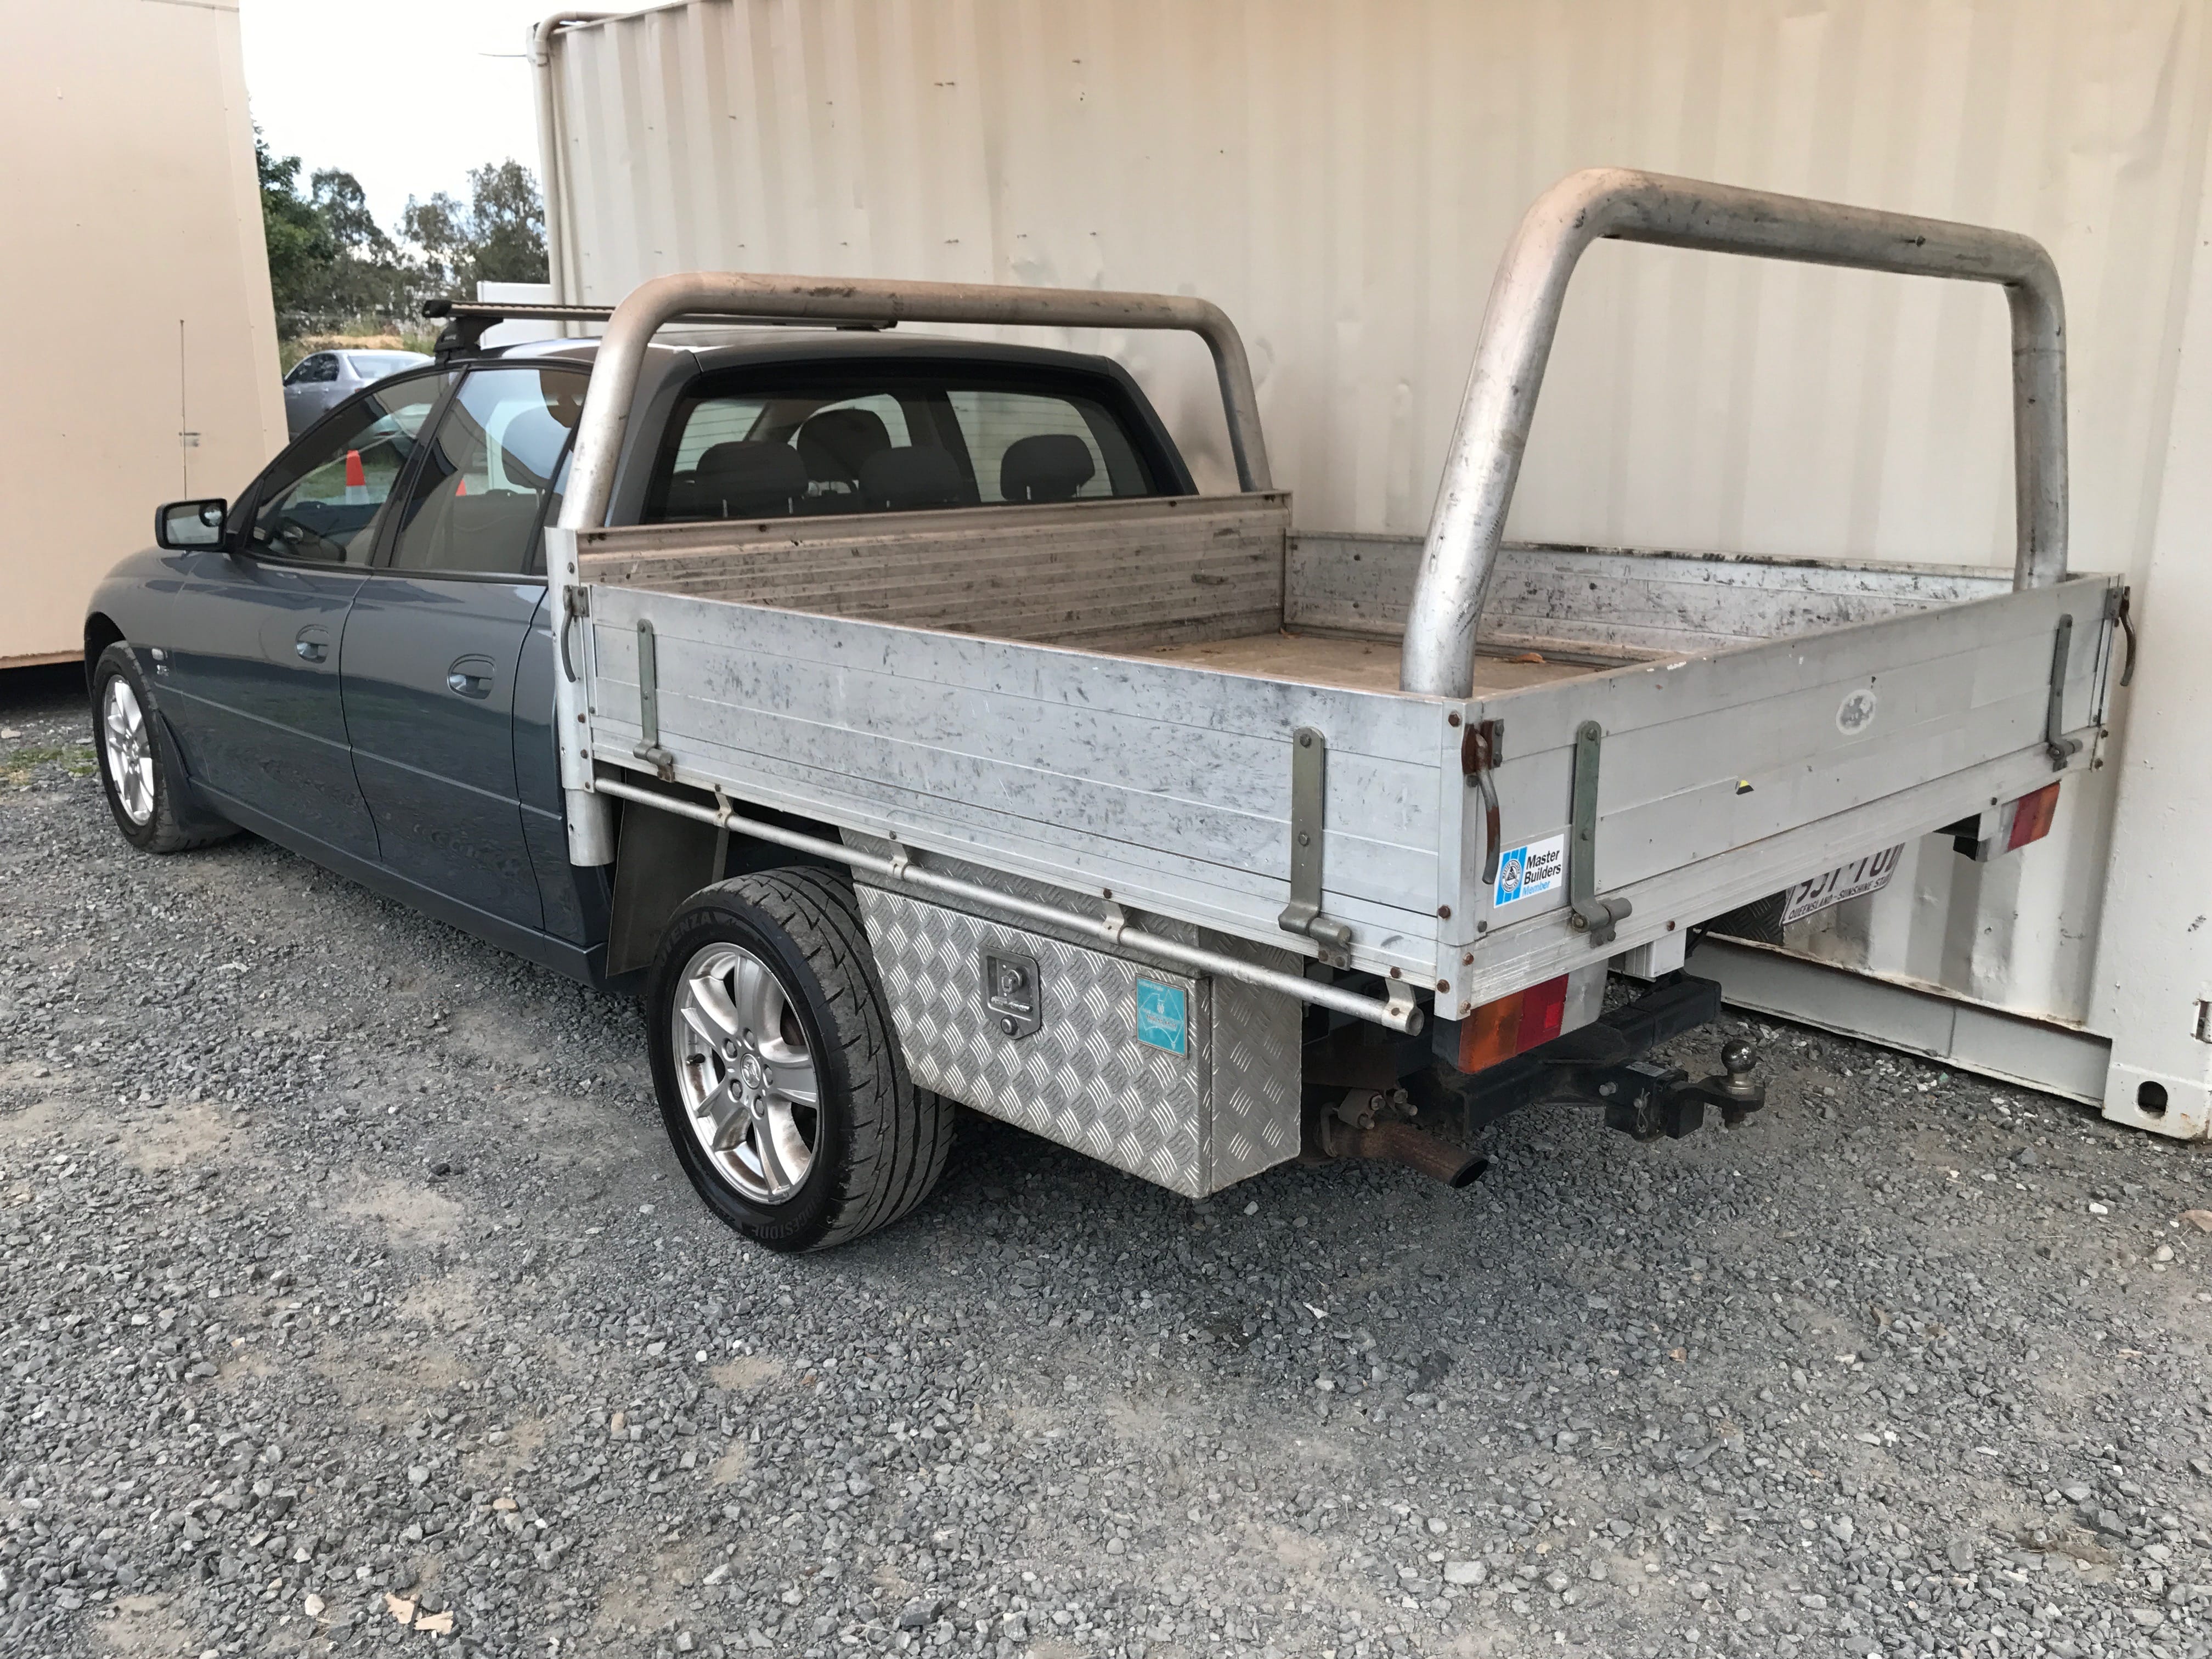 Holden Commodore VY Crewman 2005 Alloy Tray for sale 5